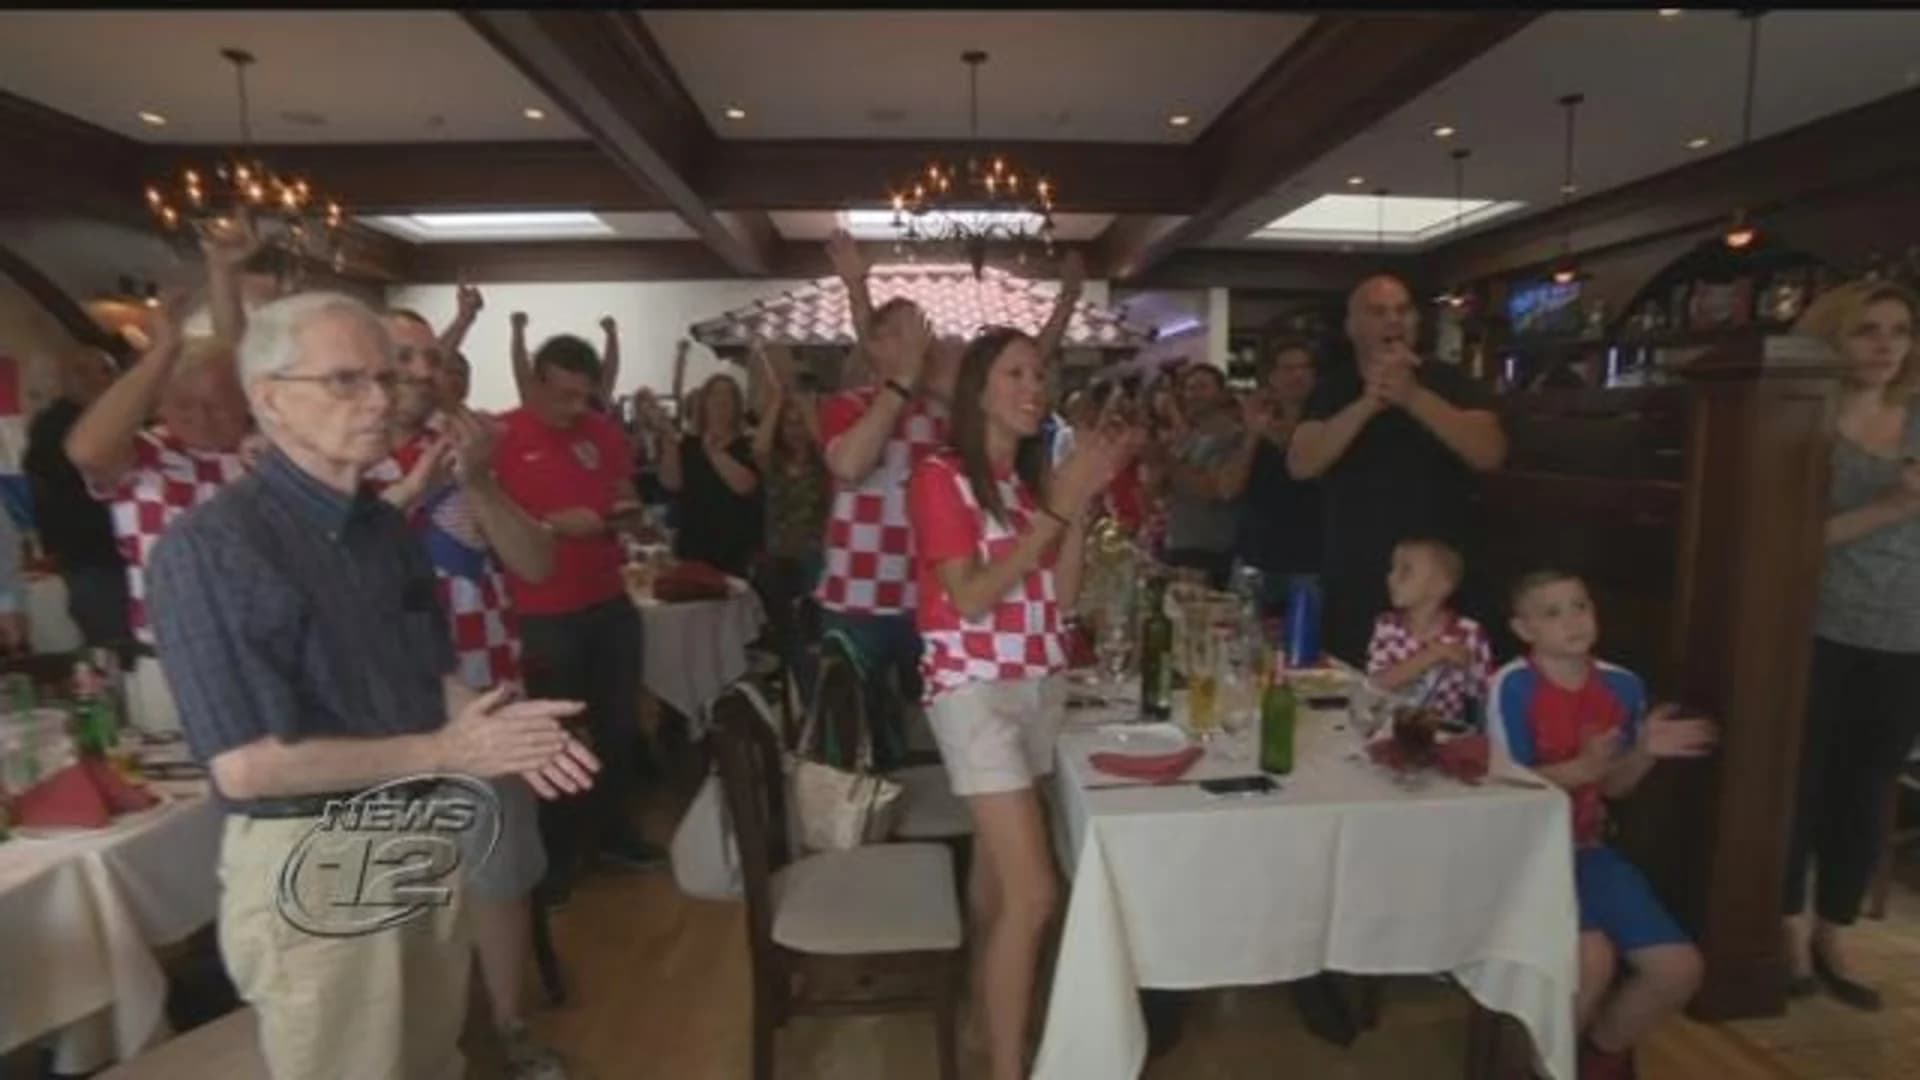 Soccer fans in New Rochelle gather for World Cup final